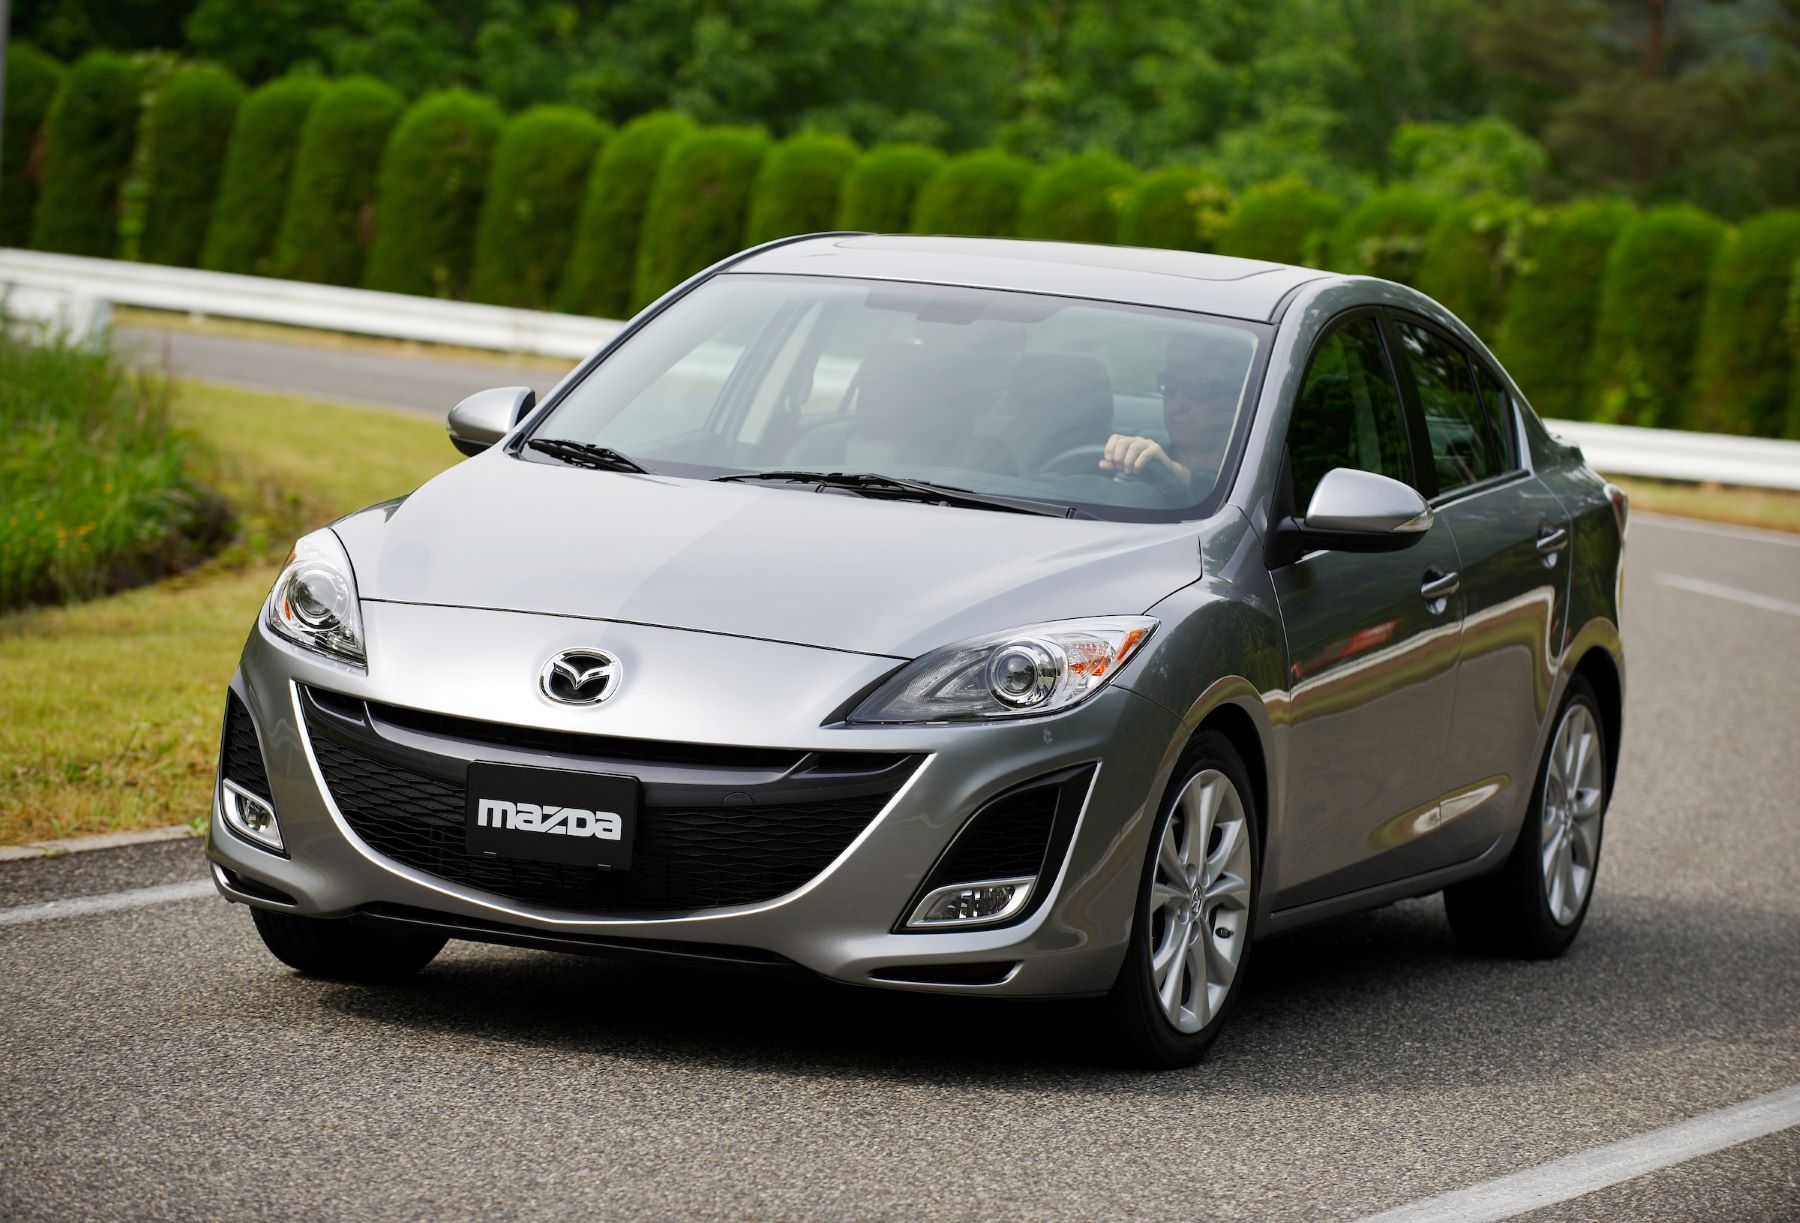 2010 Mazda 3 Reviews Ratings Prices  Consumer Reports